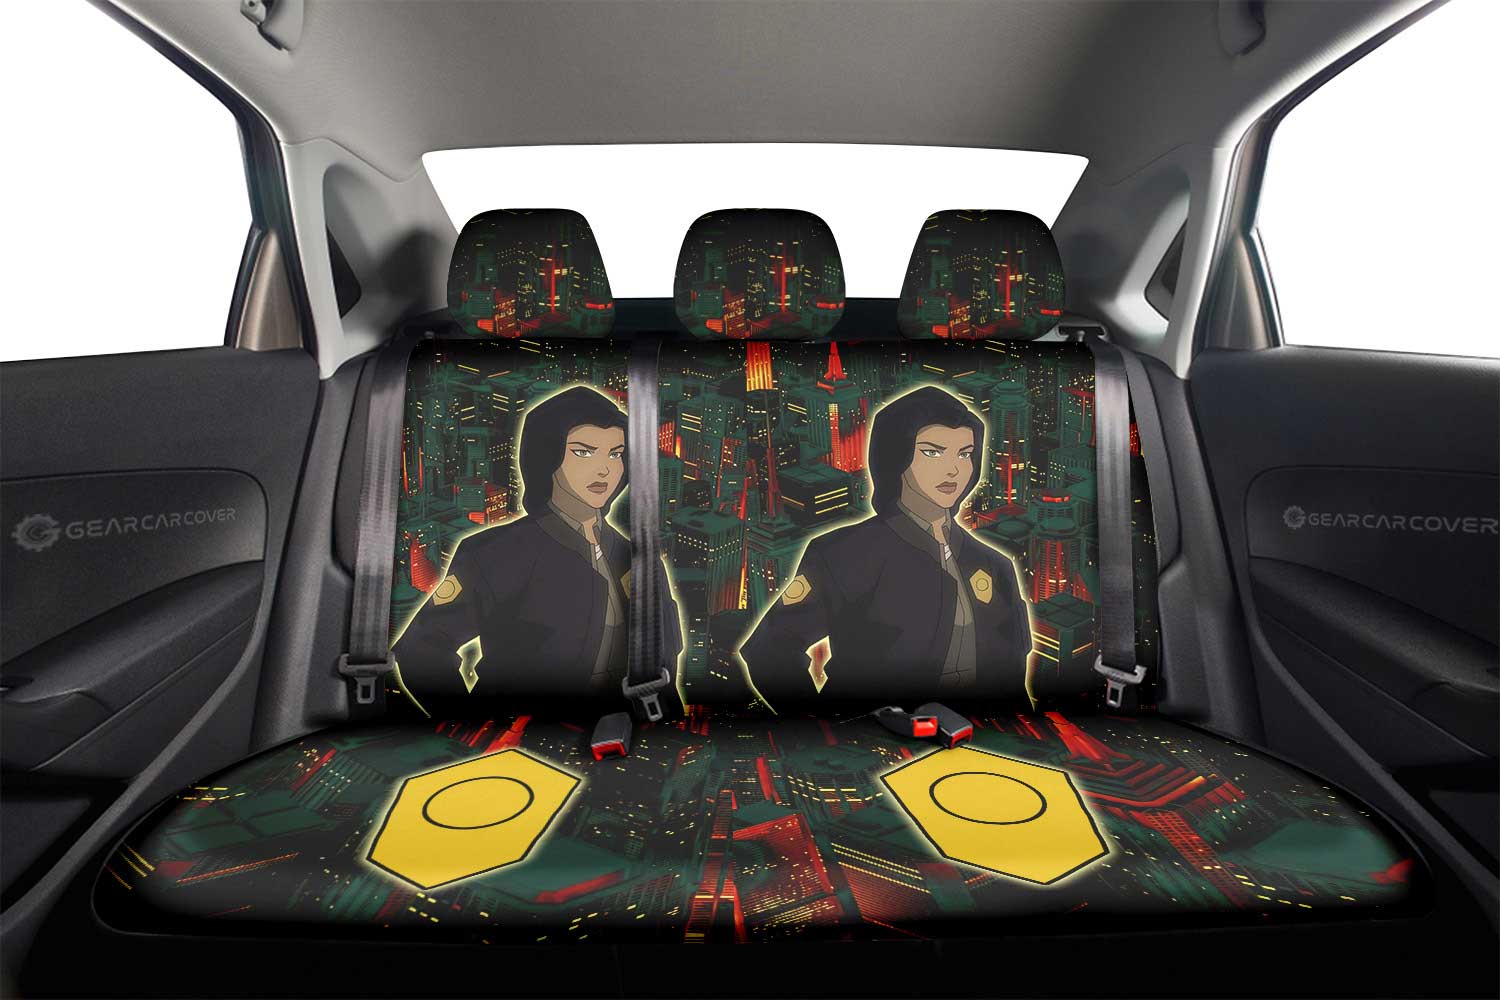 Bethany Lee Car Back Seat Cover Custom Car Accessories - Gearcarcover - 2